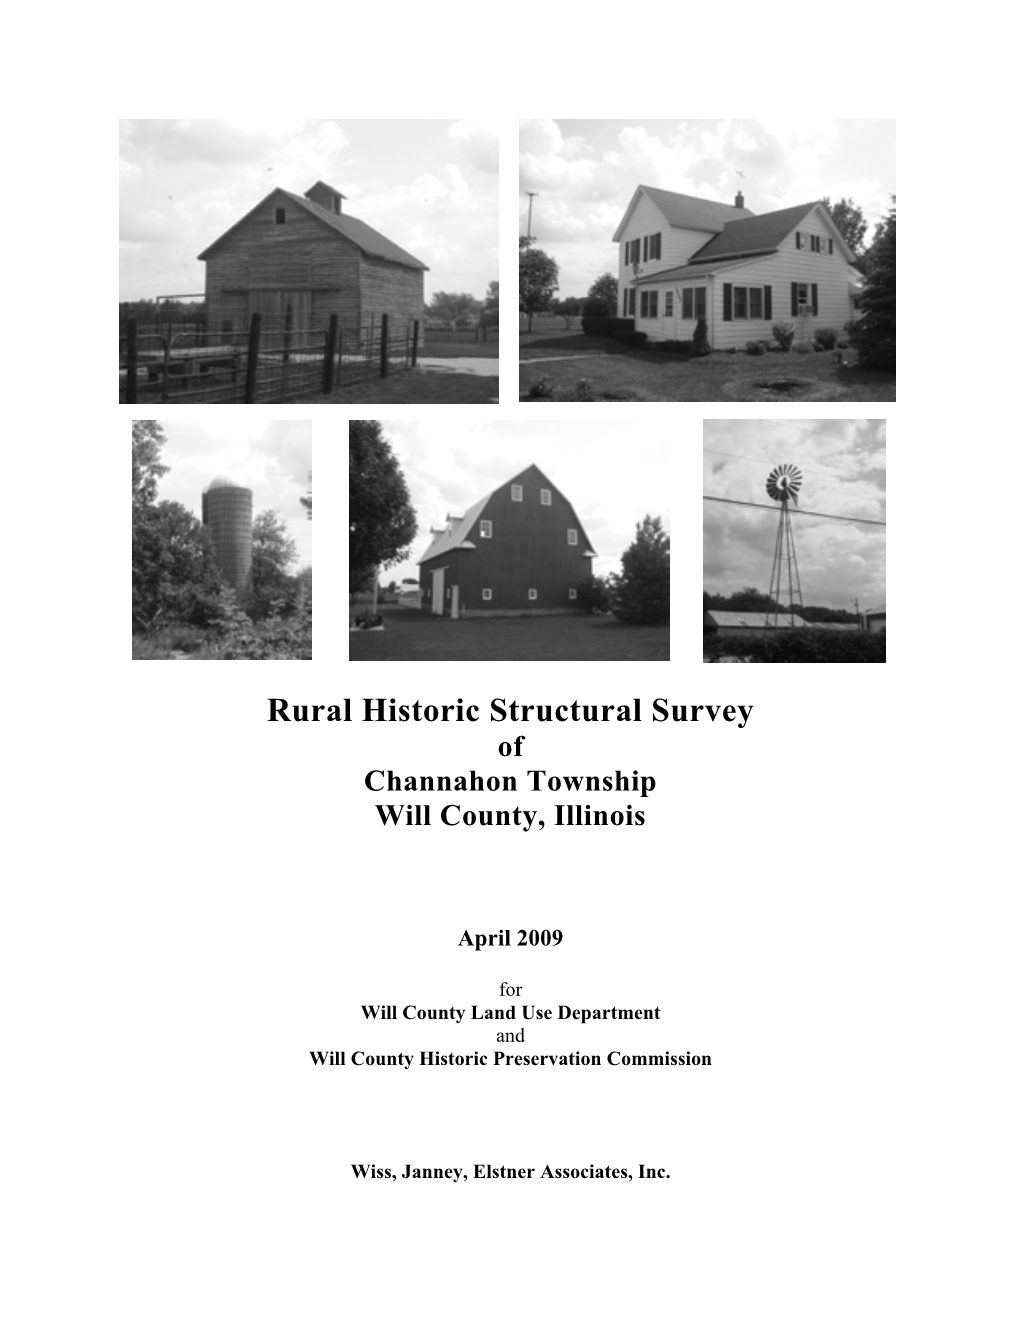 Rural Historic Structural Survey of Channahon Township Will County, Illinois